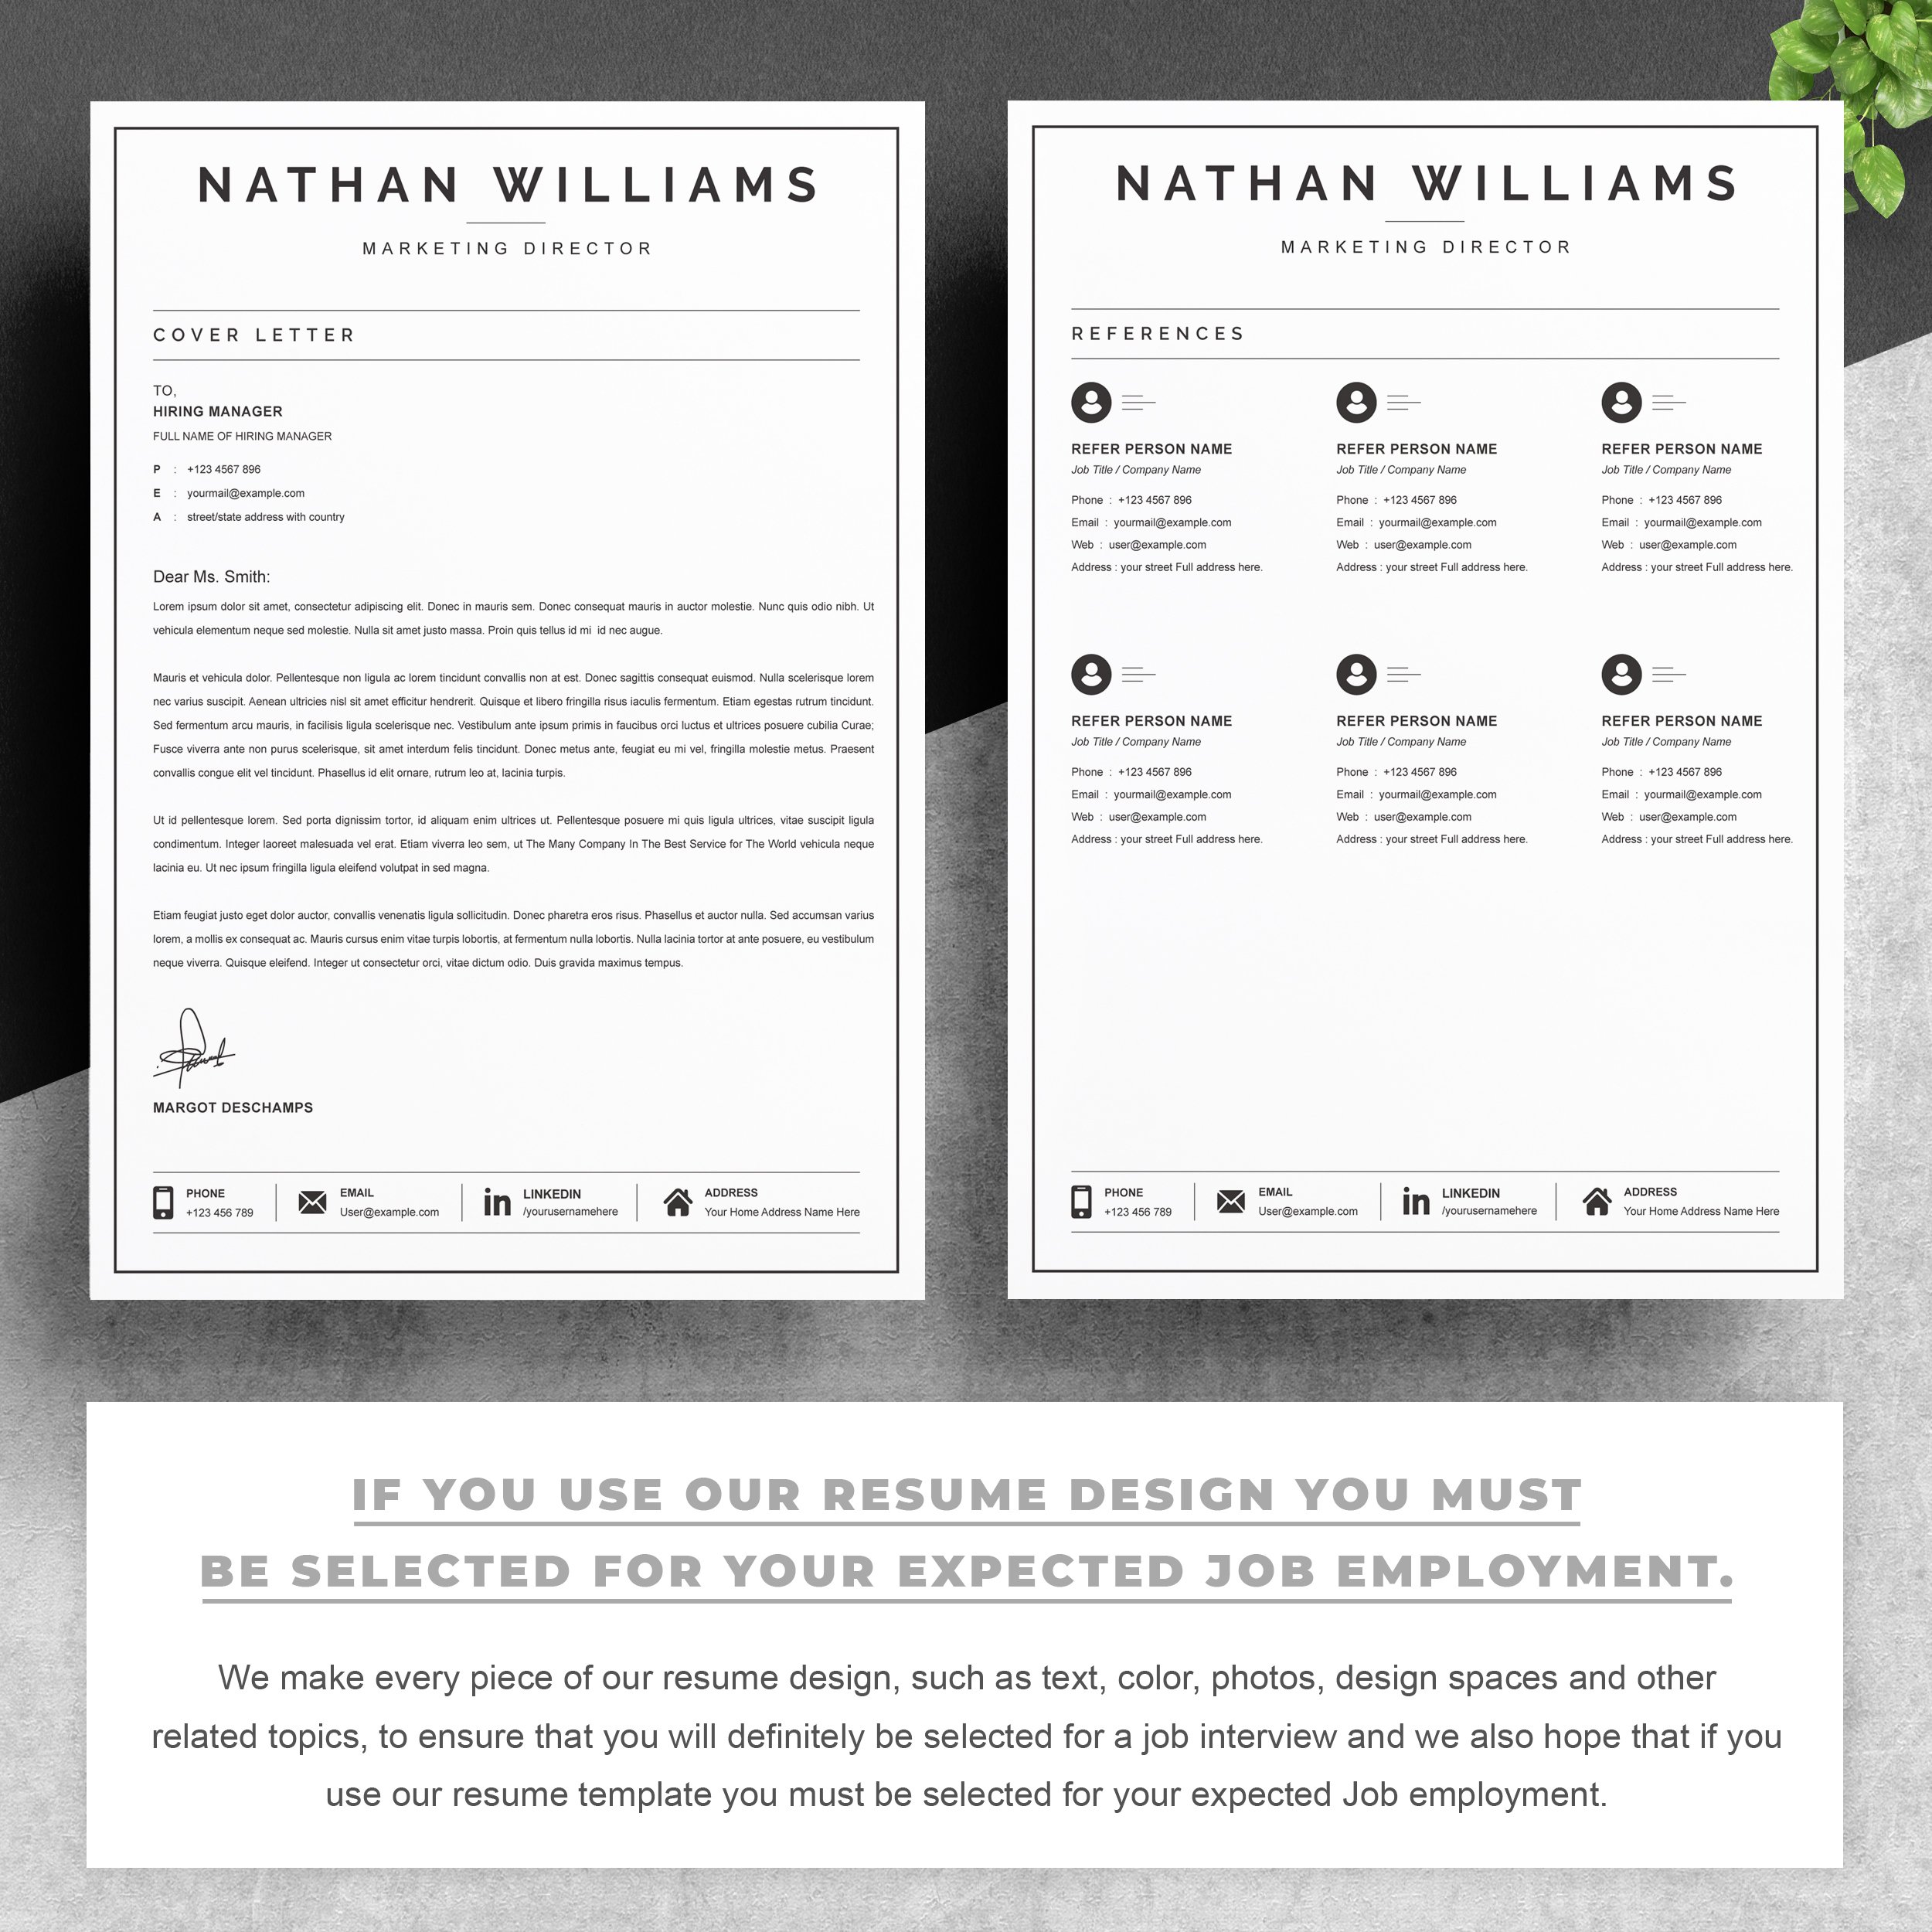 03 2 pages free resume design template copy 905